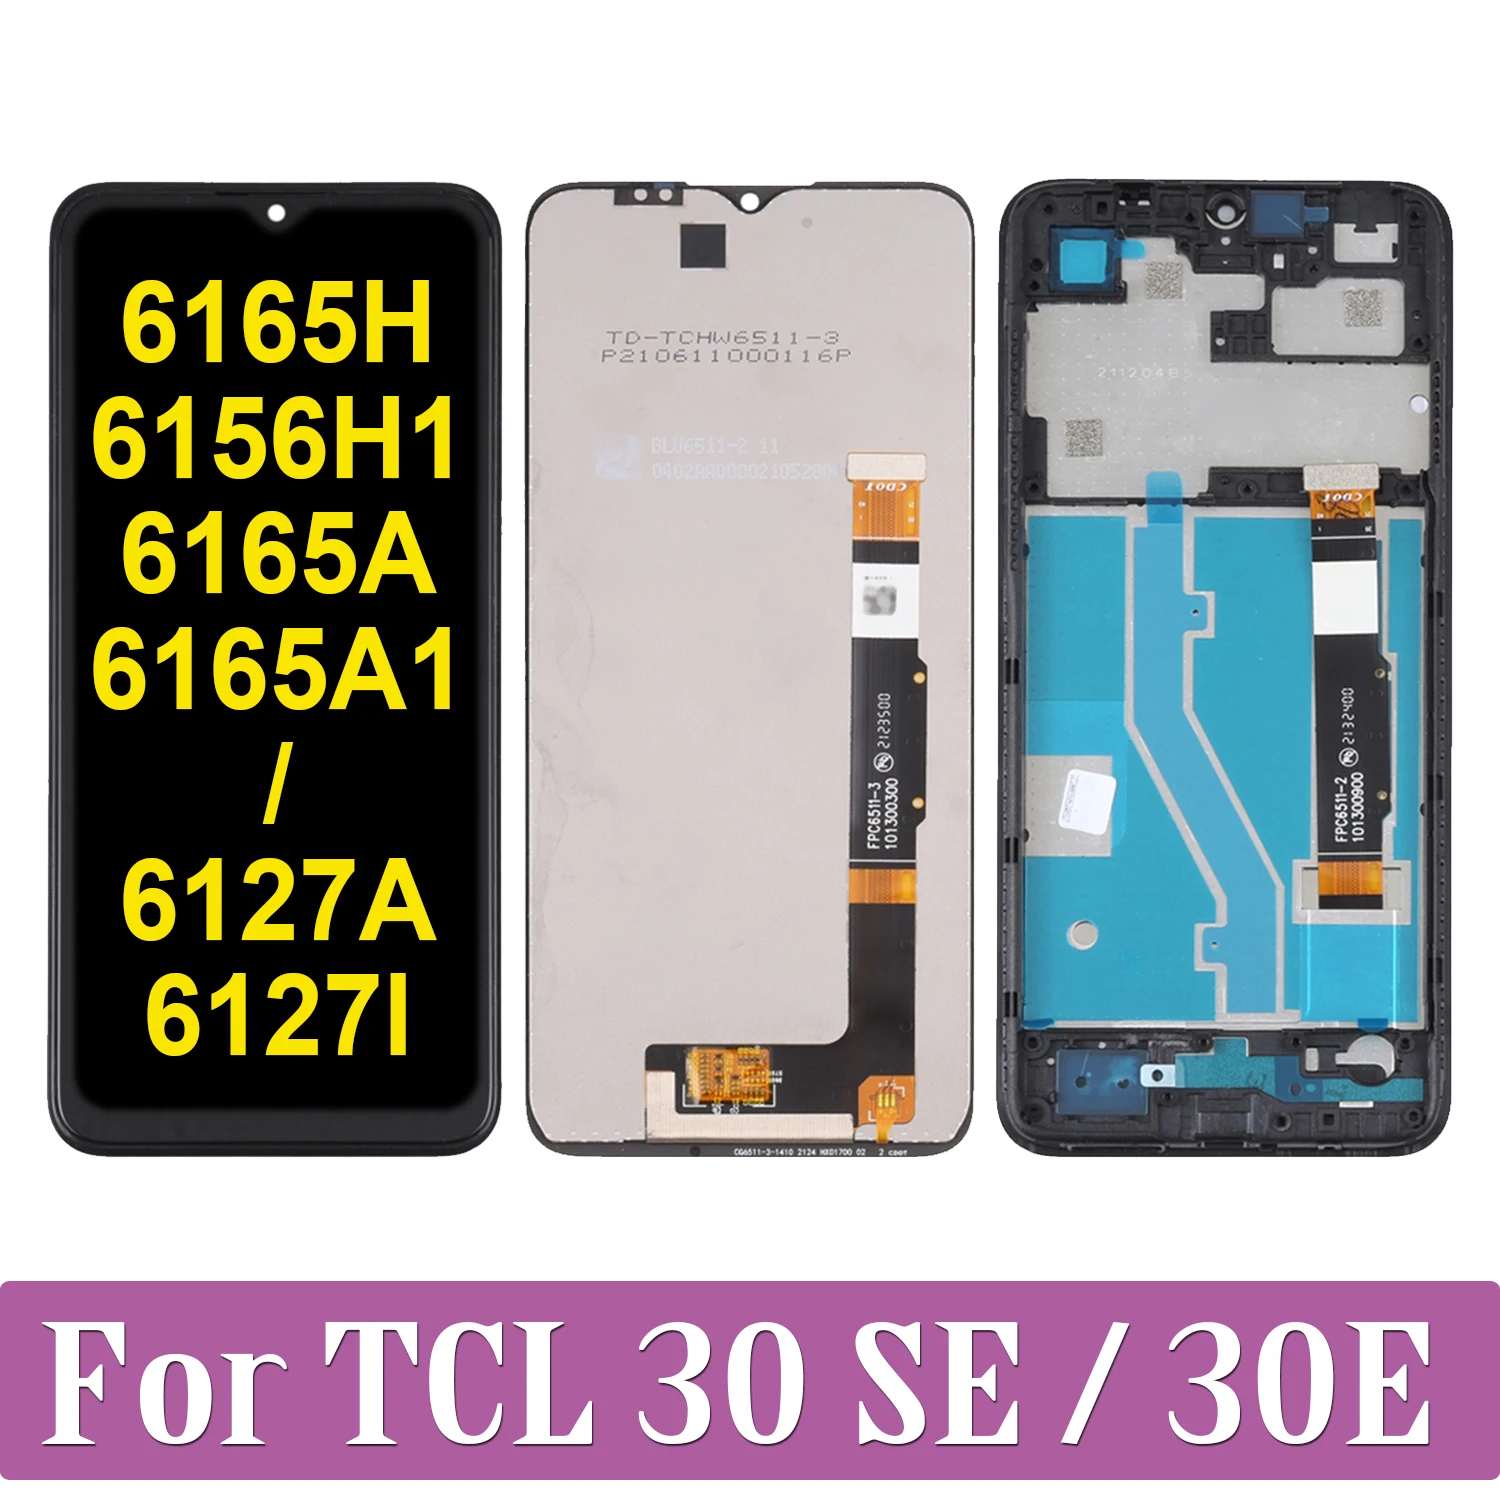 

Original For TCL 30 SE TCL30SE 6165H 6156H1 6165A 6165A1 LCD Display Touch Screen Digitizer For TCL 30E 30 E 6127A 6127l Display